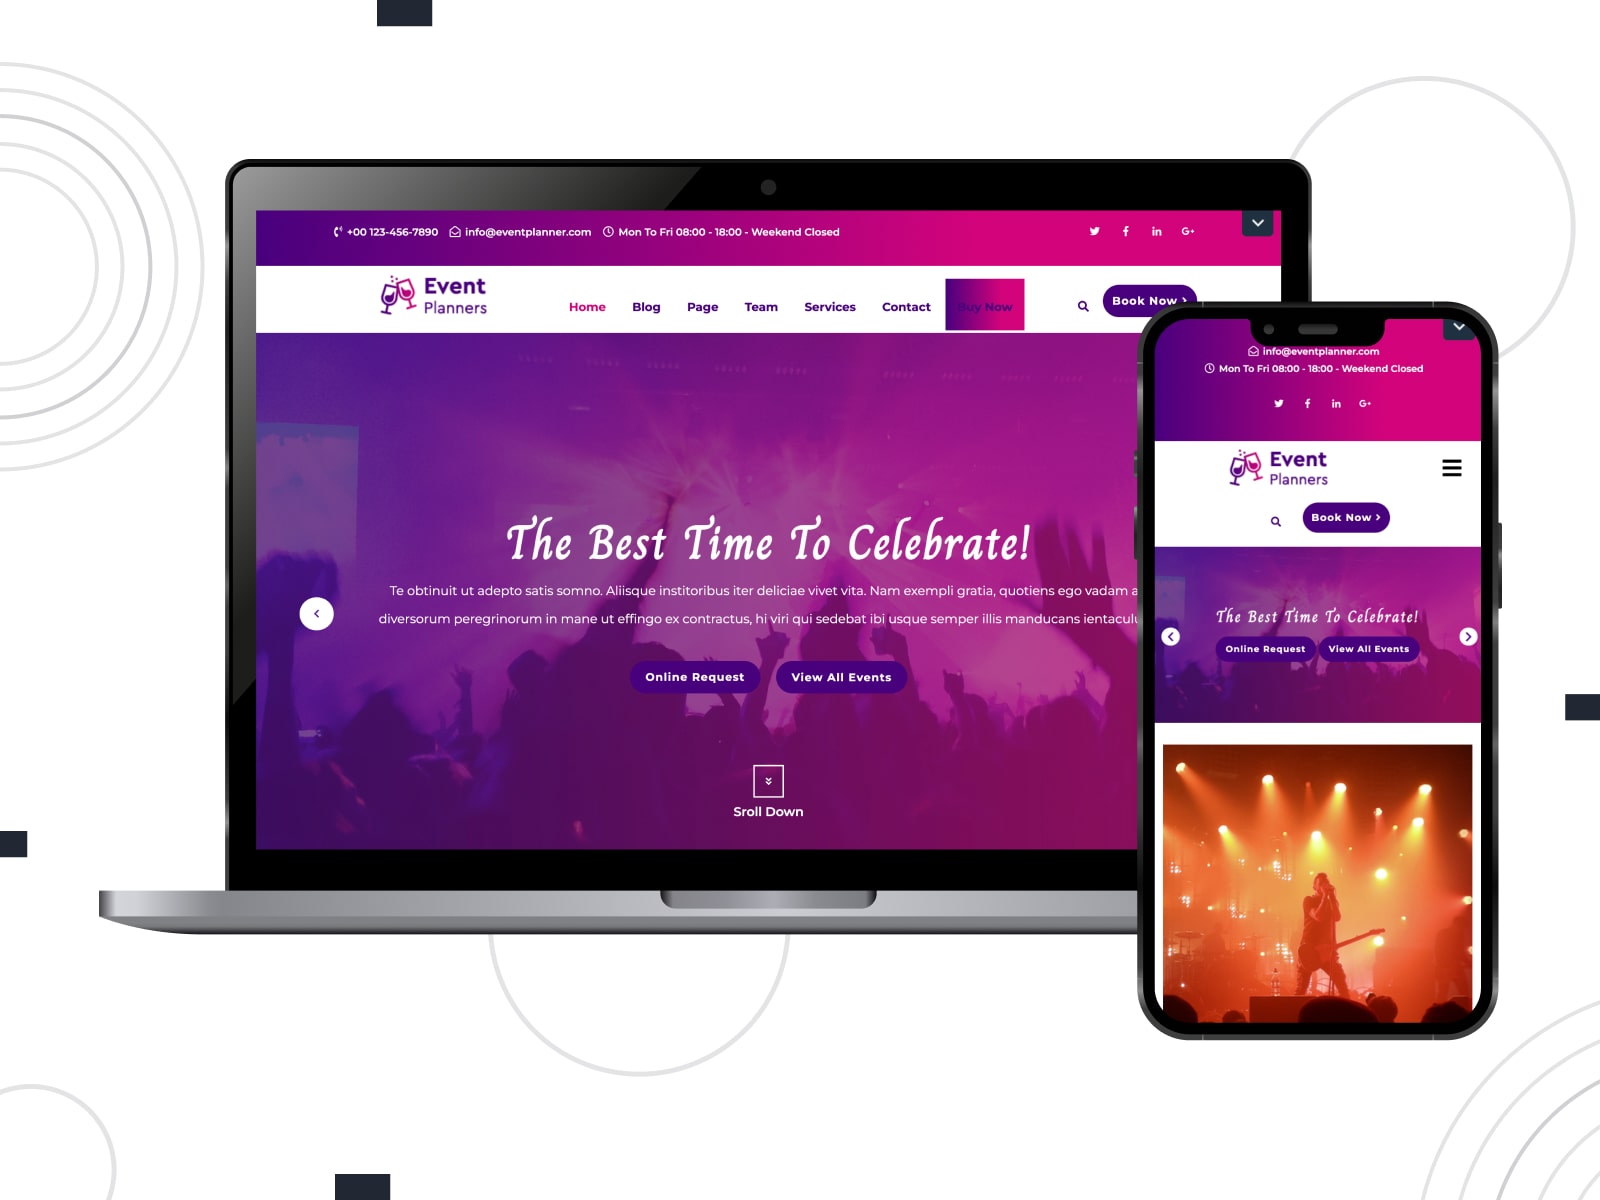 Collage of the free VW Event Planner party rental website template for WordPress demo page in violet and orange colors.